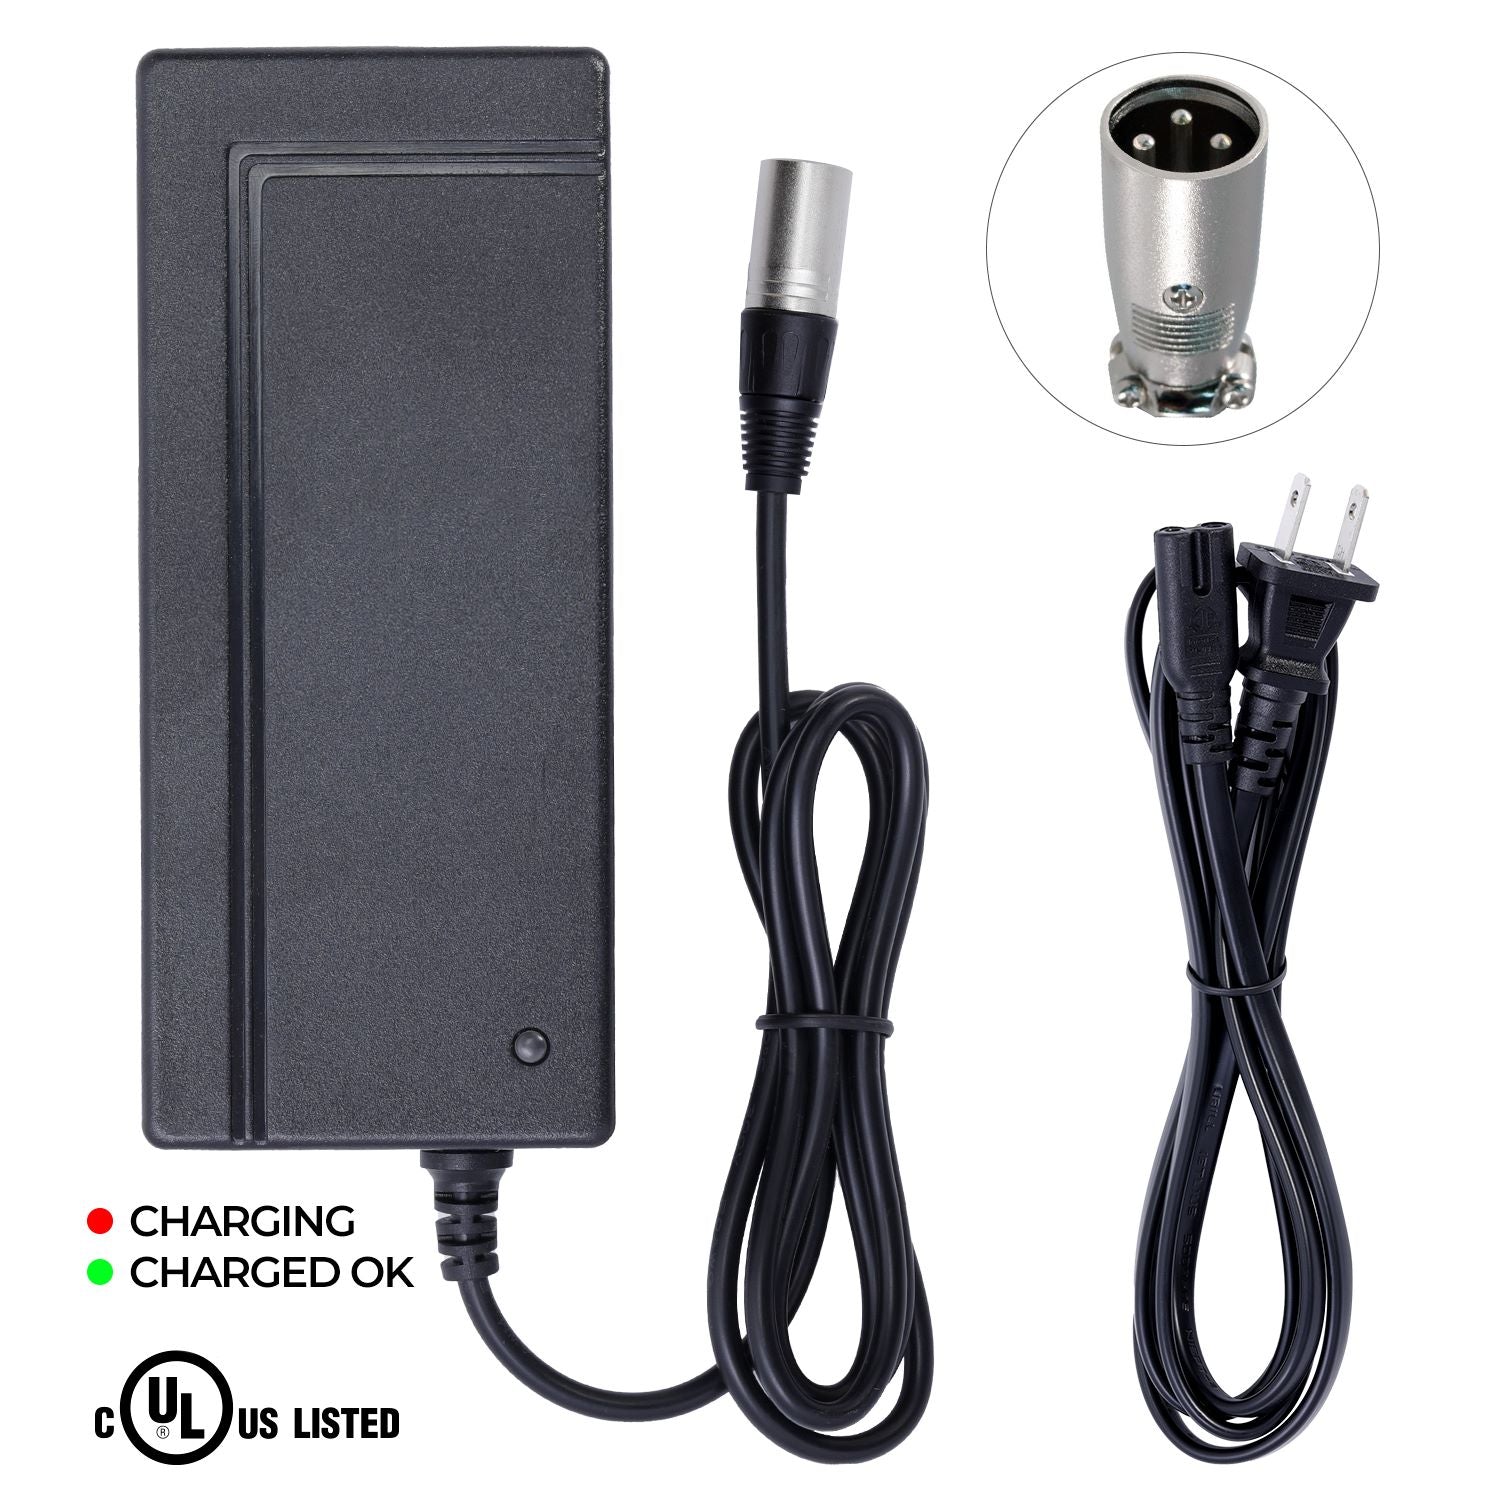 UL Certified Charger for Shoprider Echo 3-Wheel Mobility SL73 Scooter